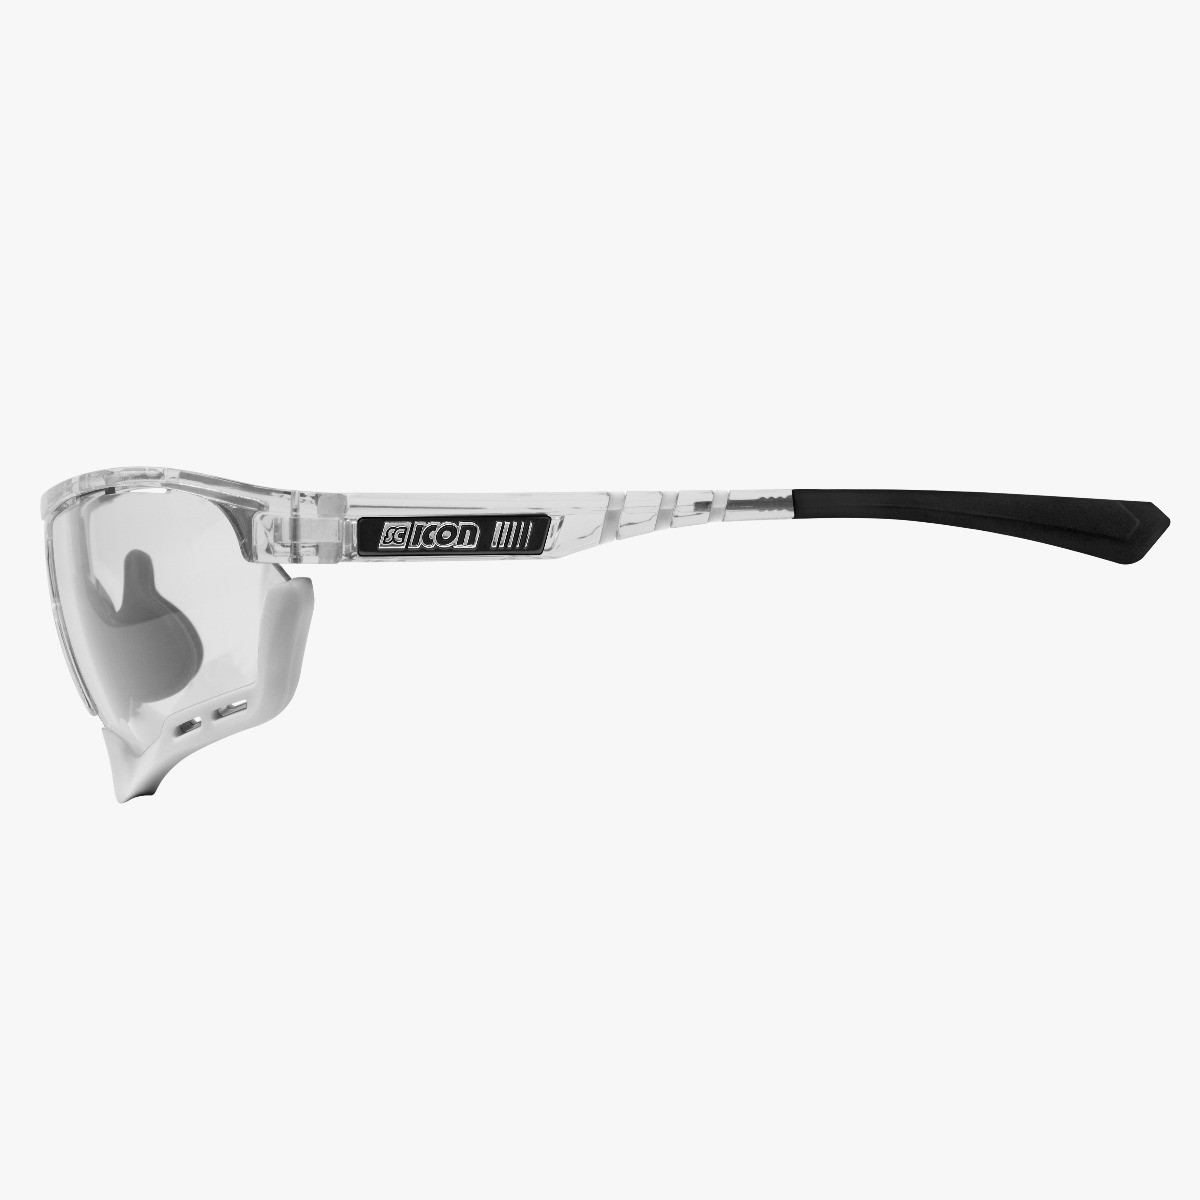 Scicon Sports | Aerocomfort Sport Cycling Performance Sunglasses - Crystal Gloss / Photocromatic Blue - EY15130702
